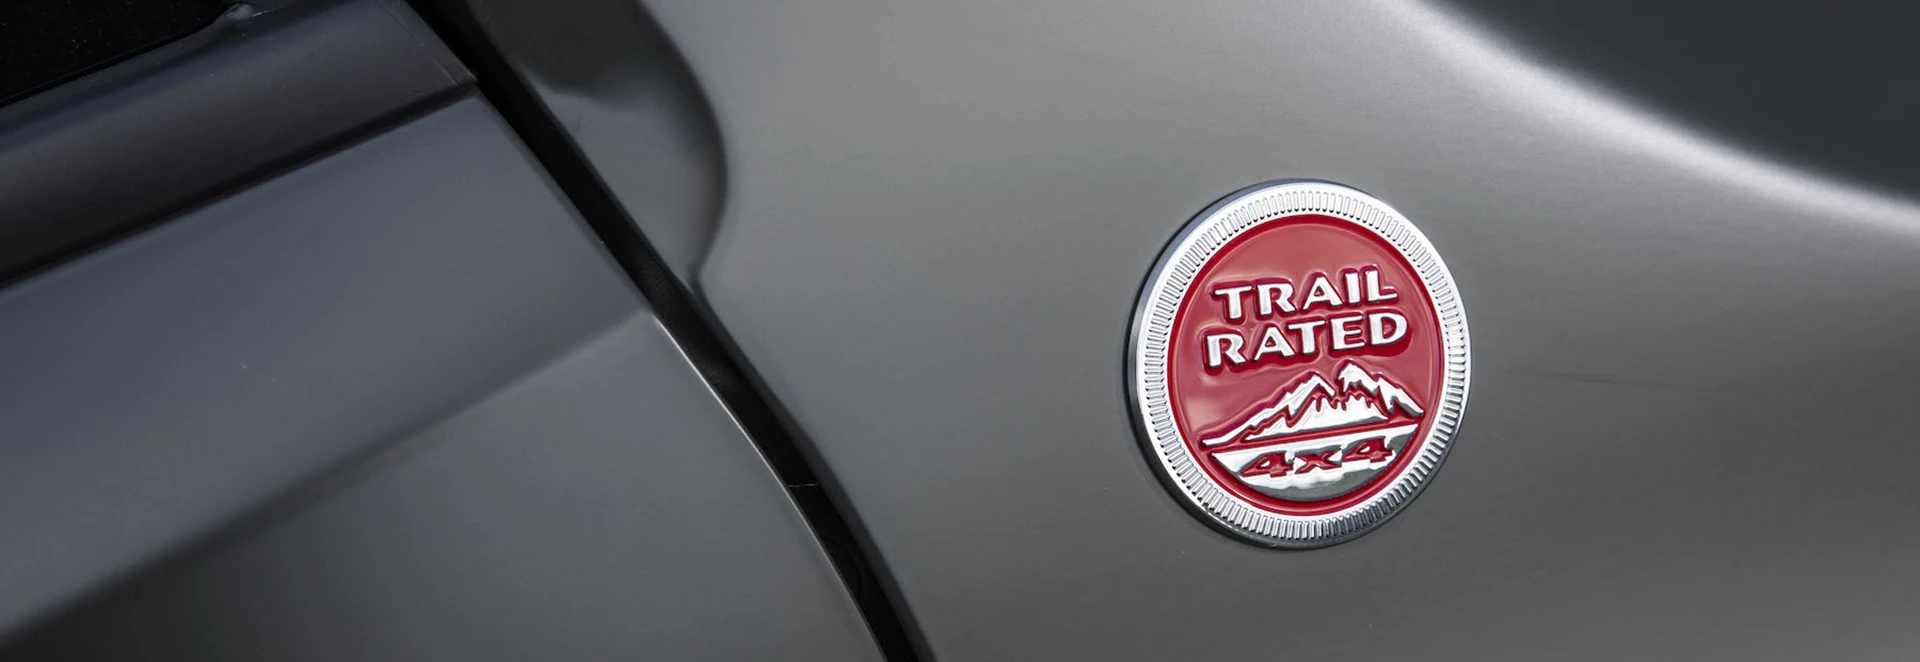 Jurassic Jeeps: What Does Jeep's Trail Rated Badge Mean? 